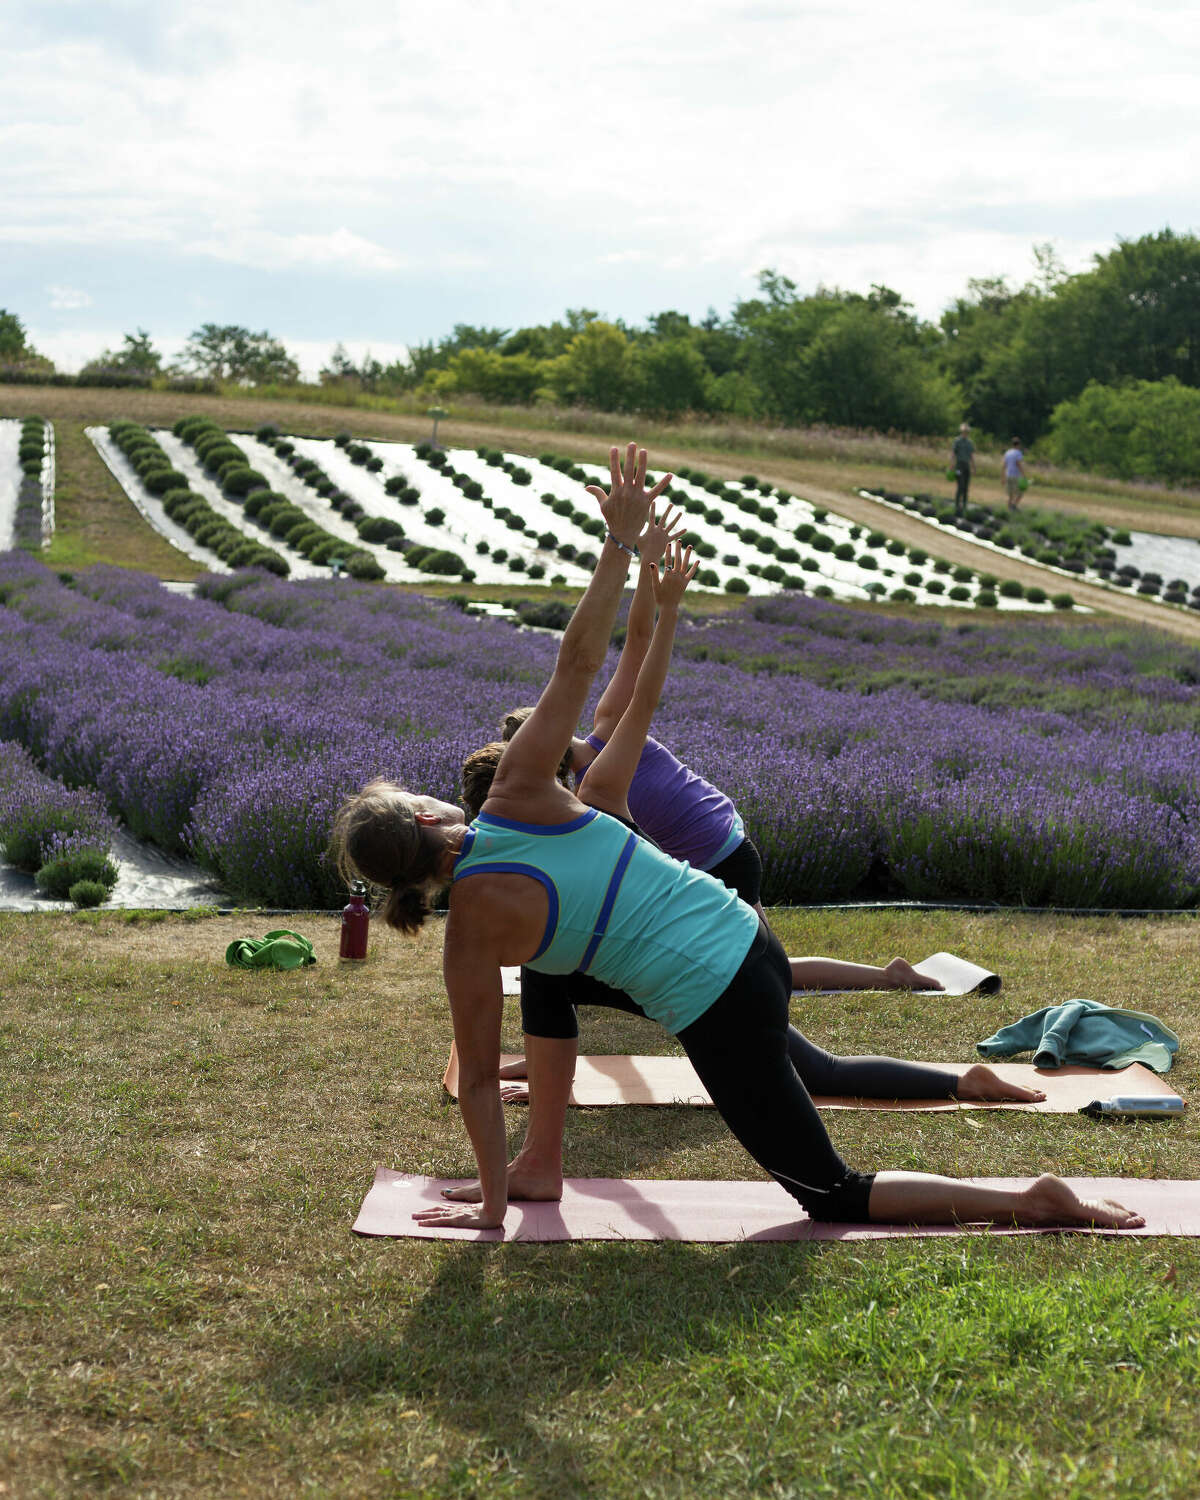 Yoga among fields of lavender provides the next level of relaxation.